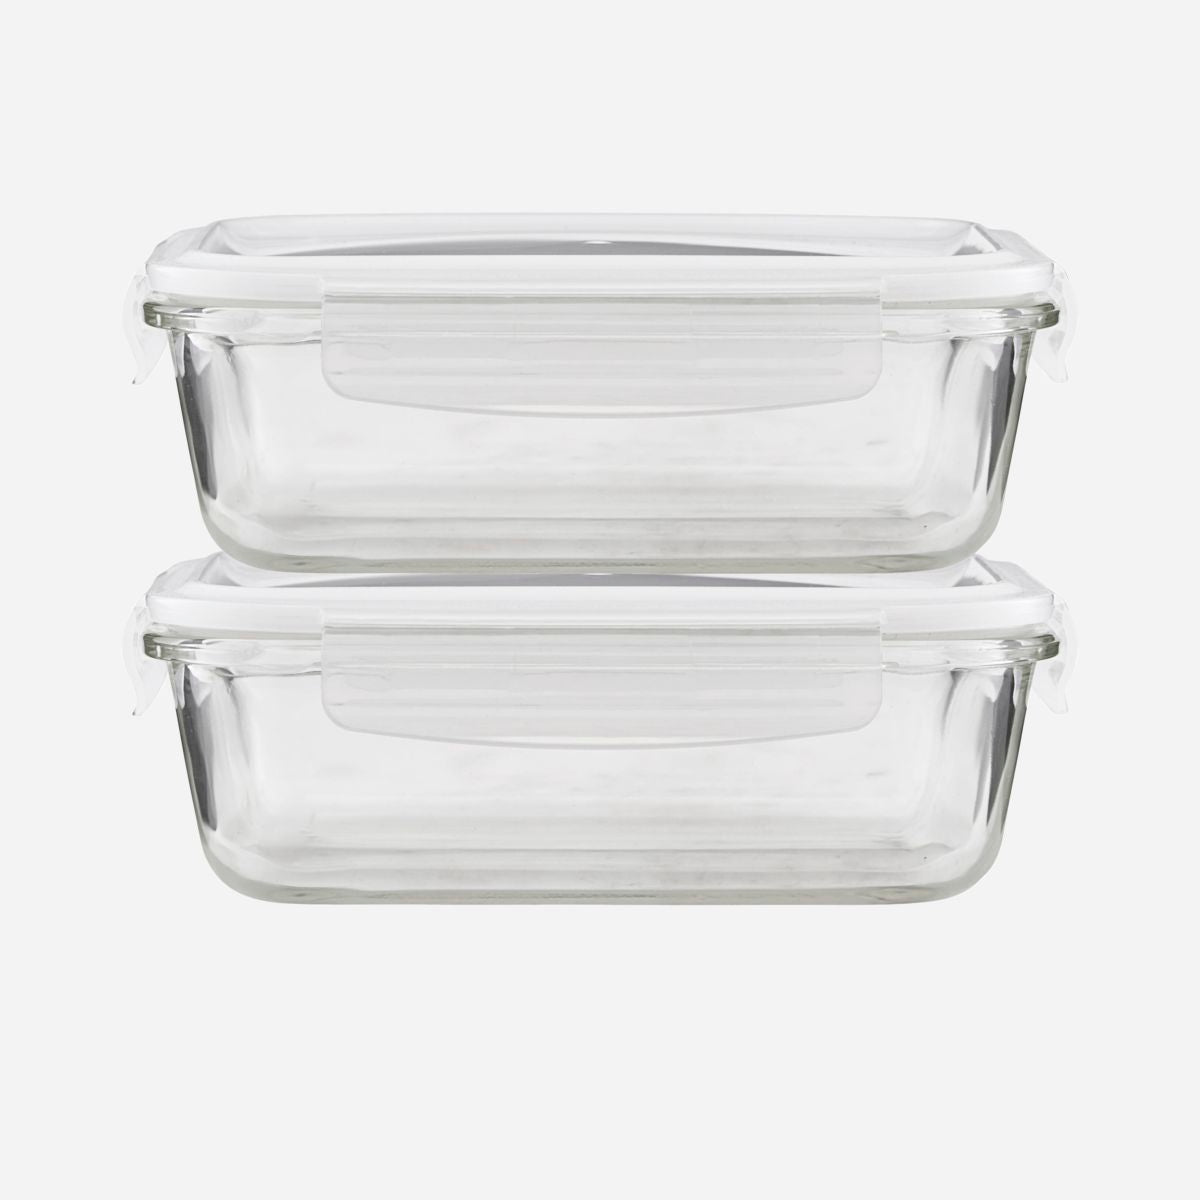 SQUARE storage with lid - clear - set of 2